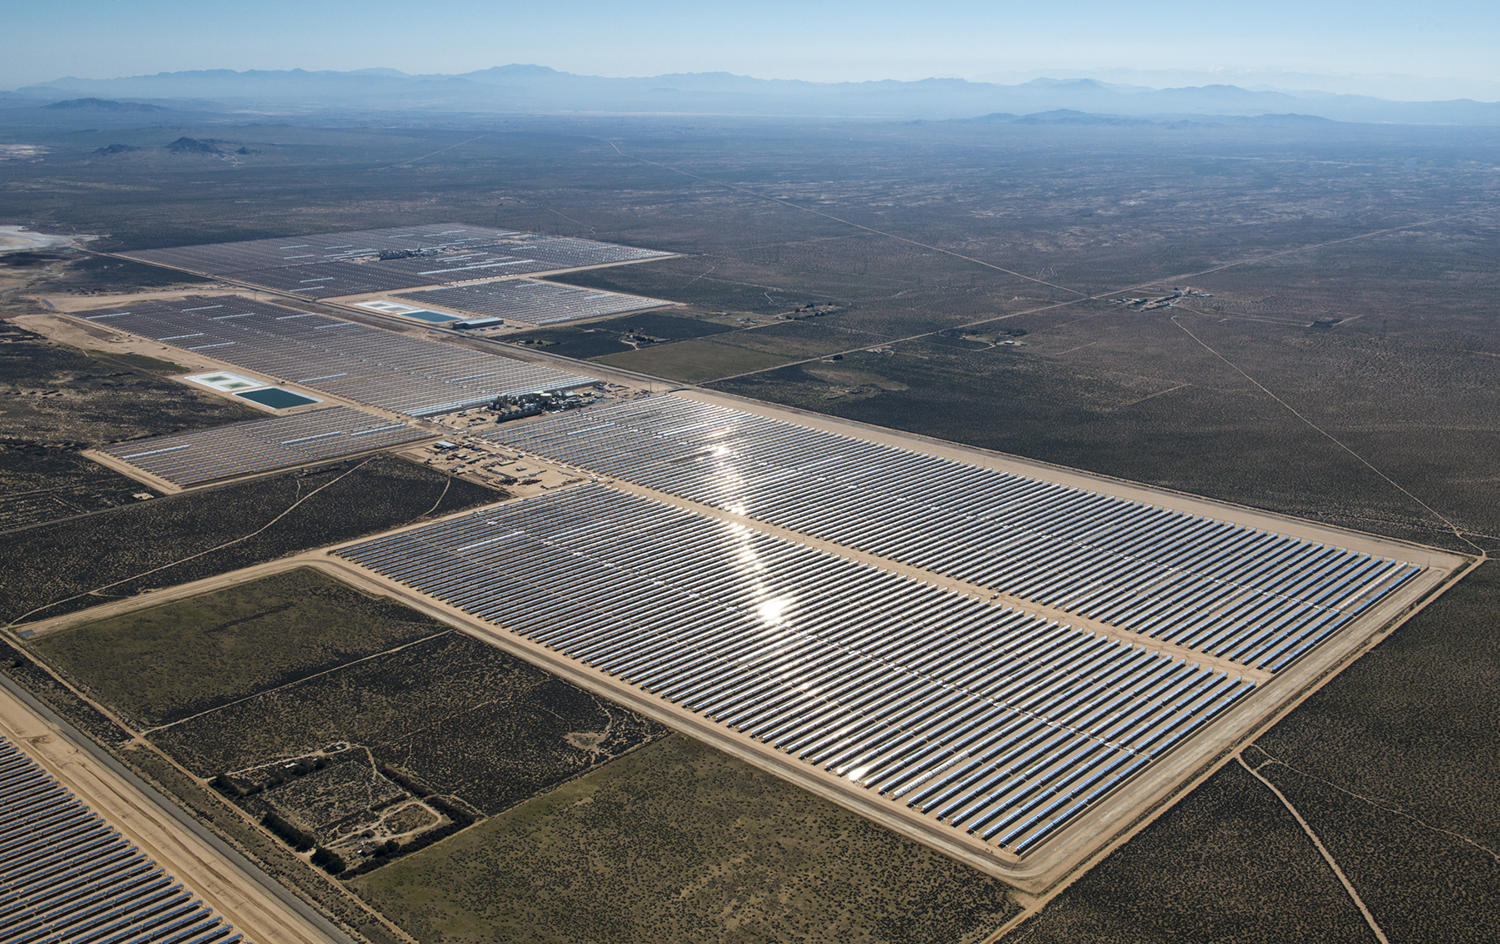 The Mojave 280 MW solar plant generates clean electricity, preventing the emission of 350’000 tons of CO2 annually.